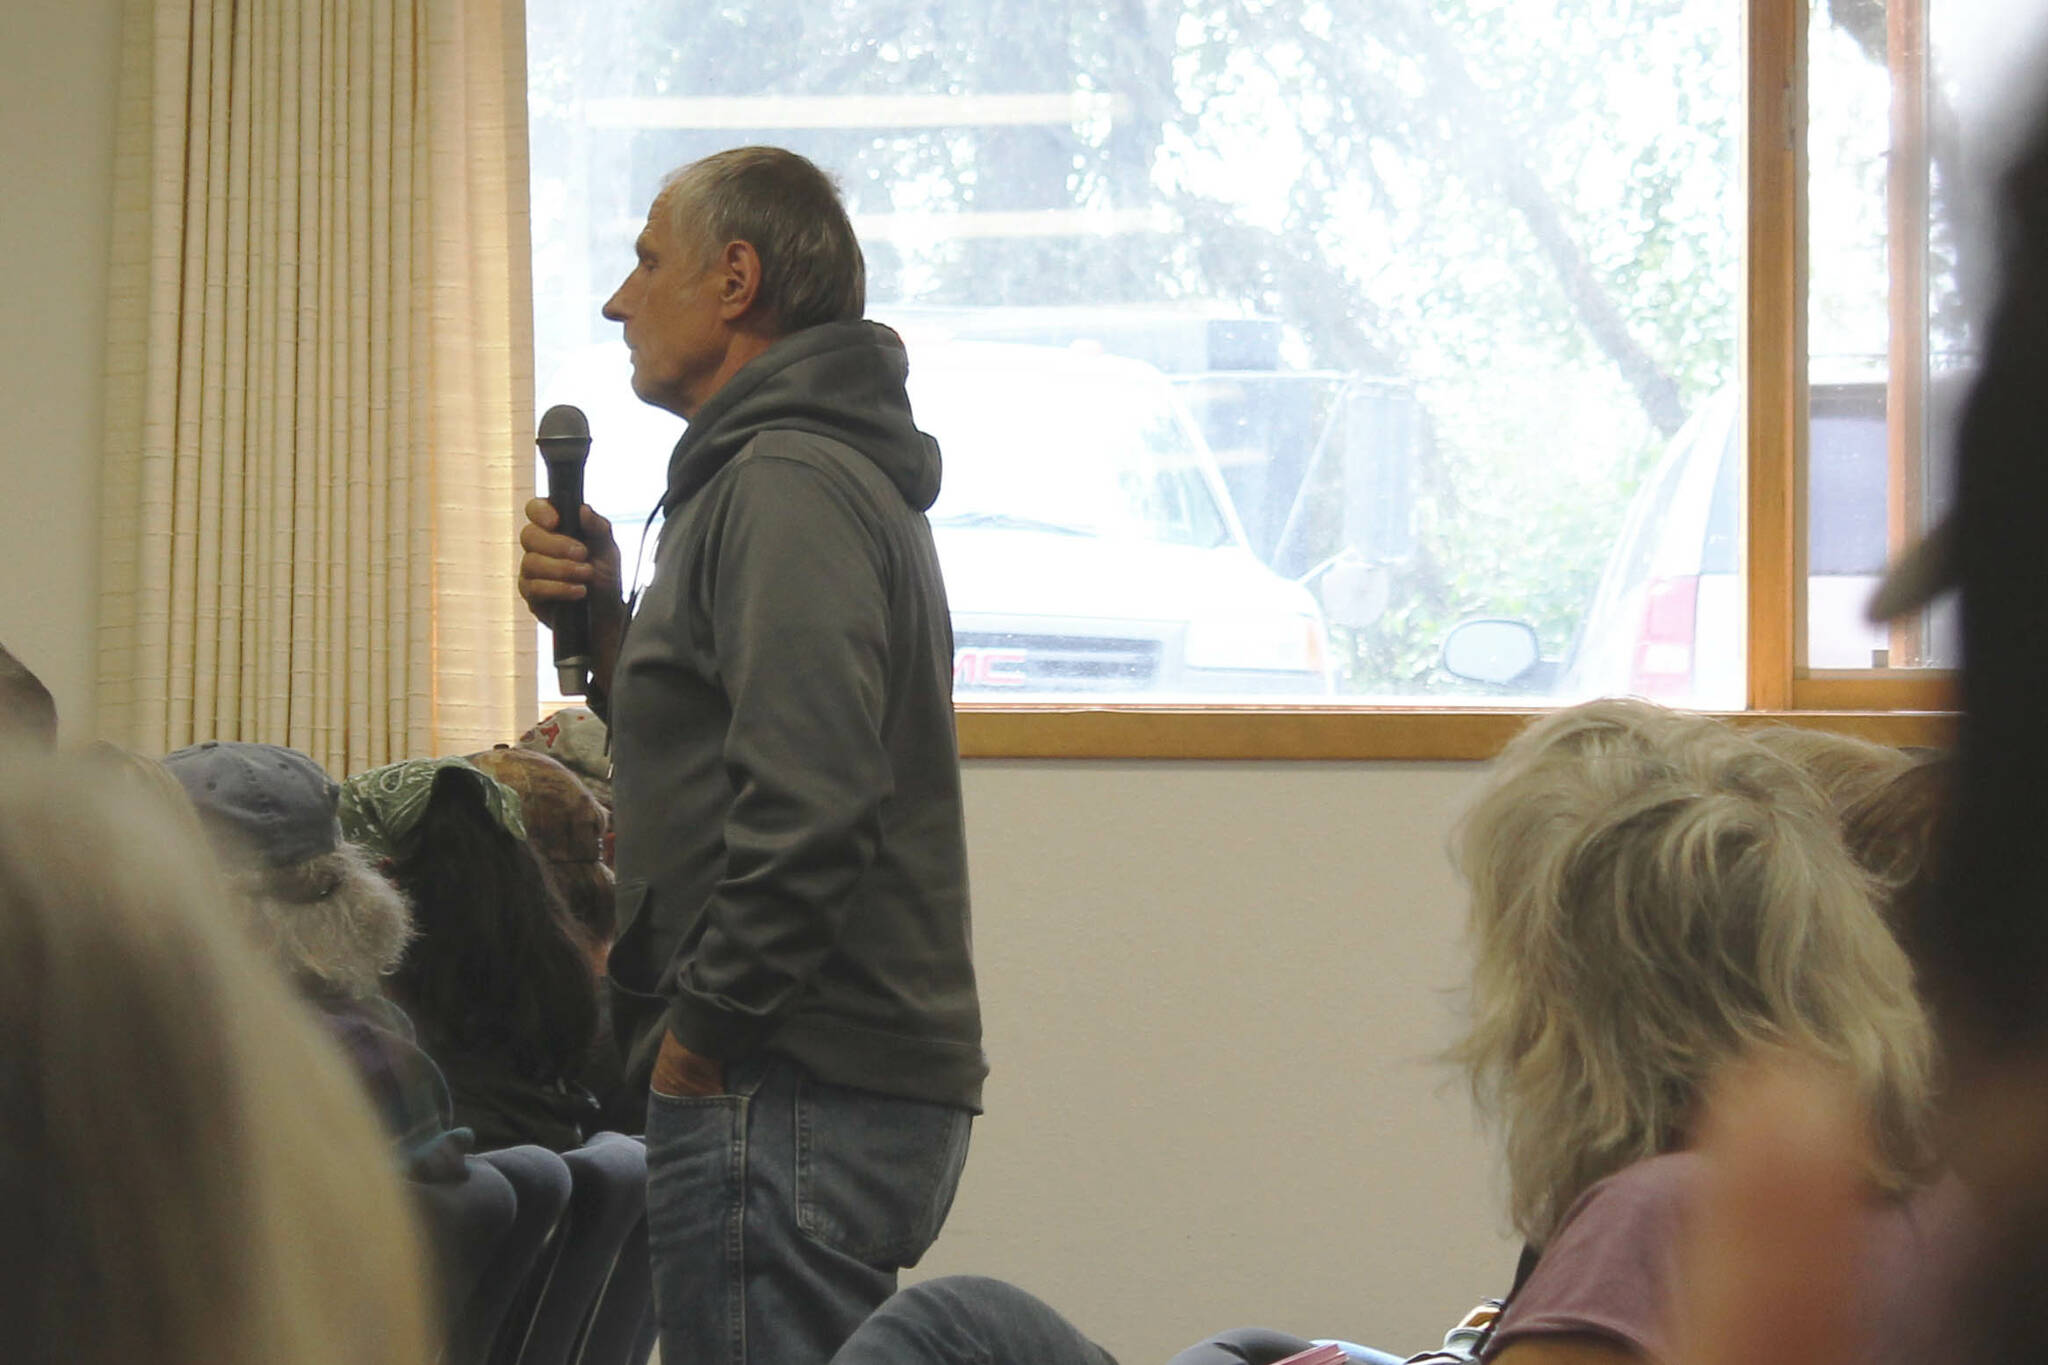 Brent Johnson speaks at a meeting with Alaska Department of Fish and Game Commissioner Doug Vincent-Lang at the Cook Inlet Aquaculture Association building on Tuesday, Aug. 2, 2022, near Kenai, Alaska. (Ashlyn O’Hara/Peninsula Clarion)